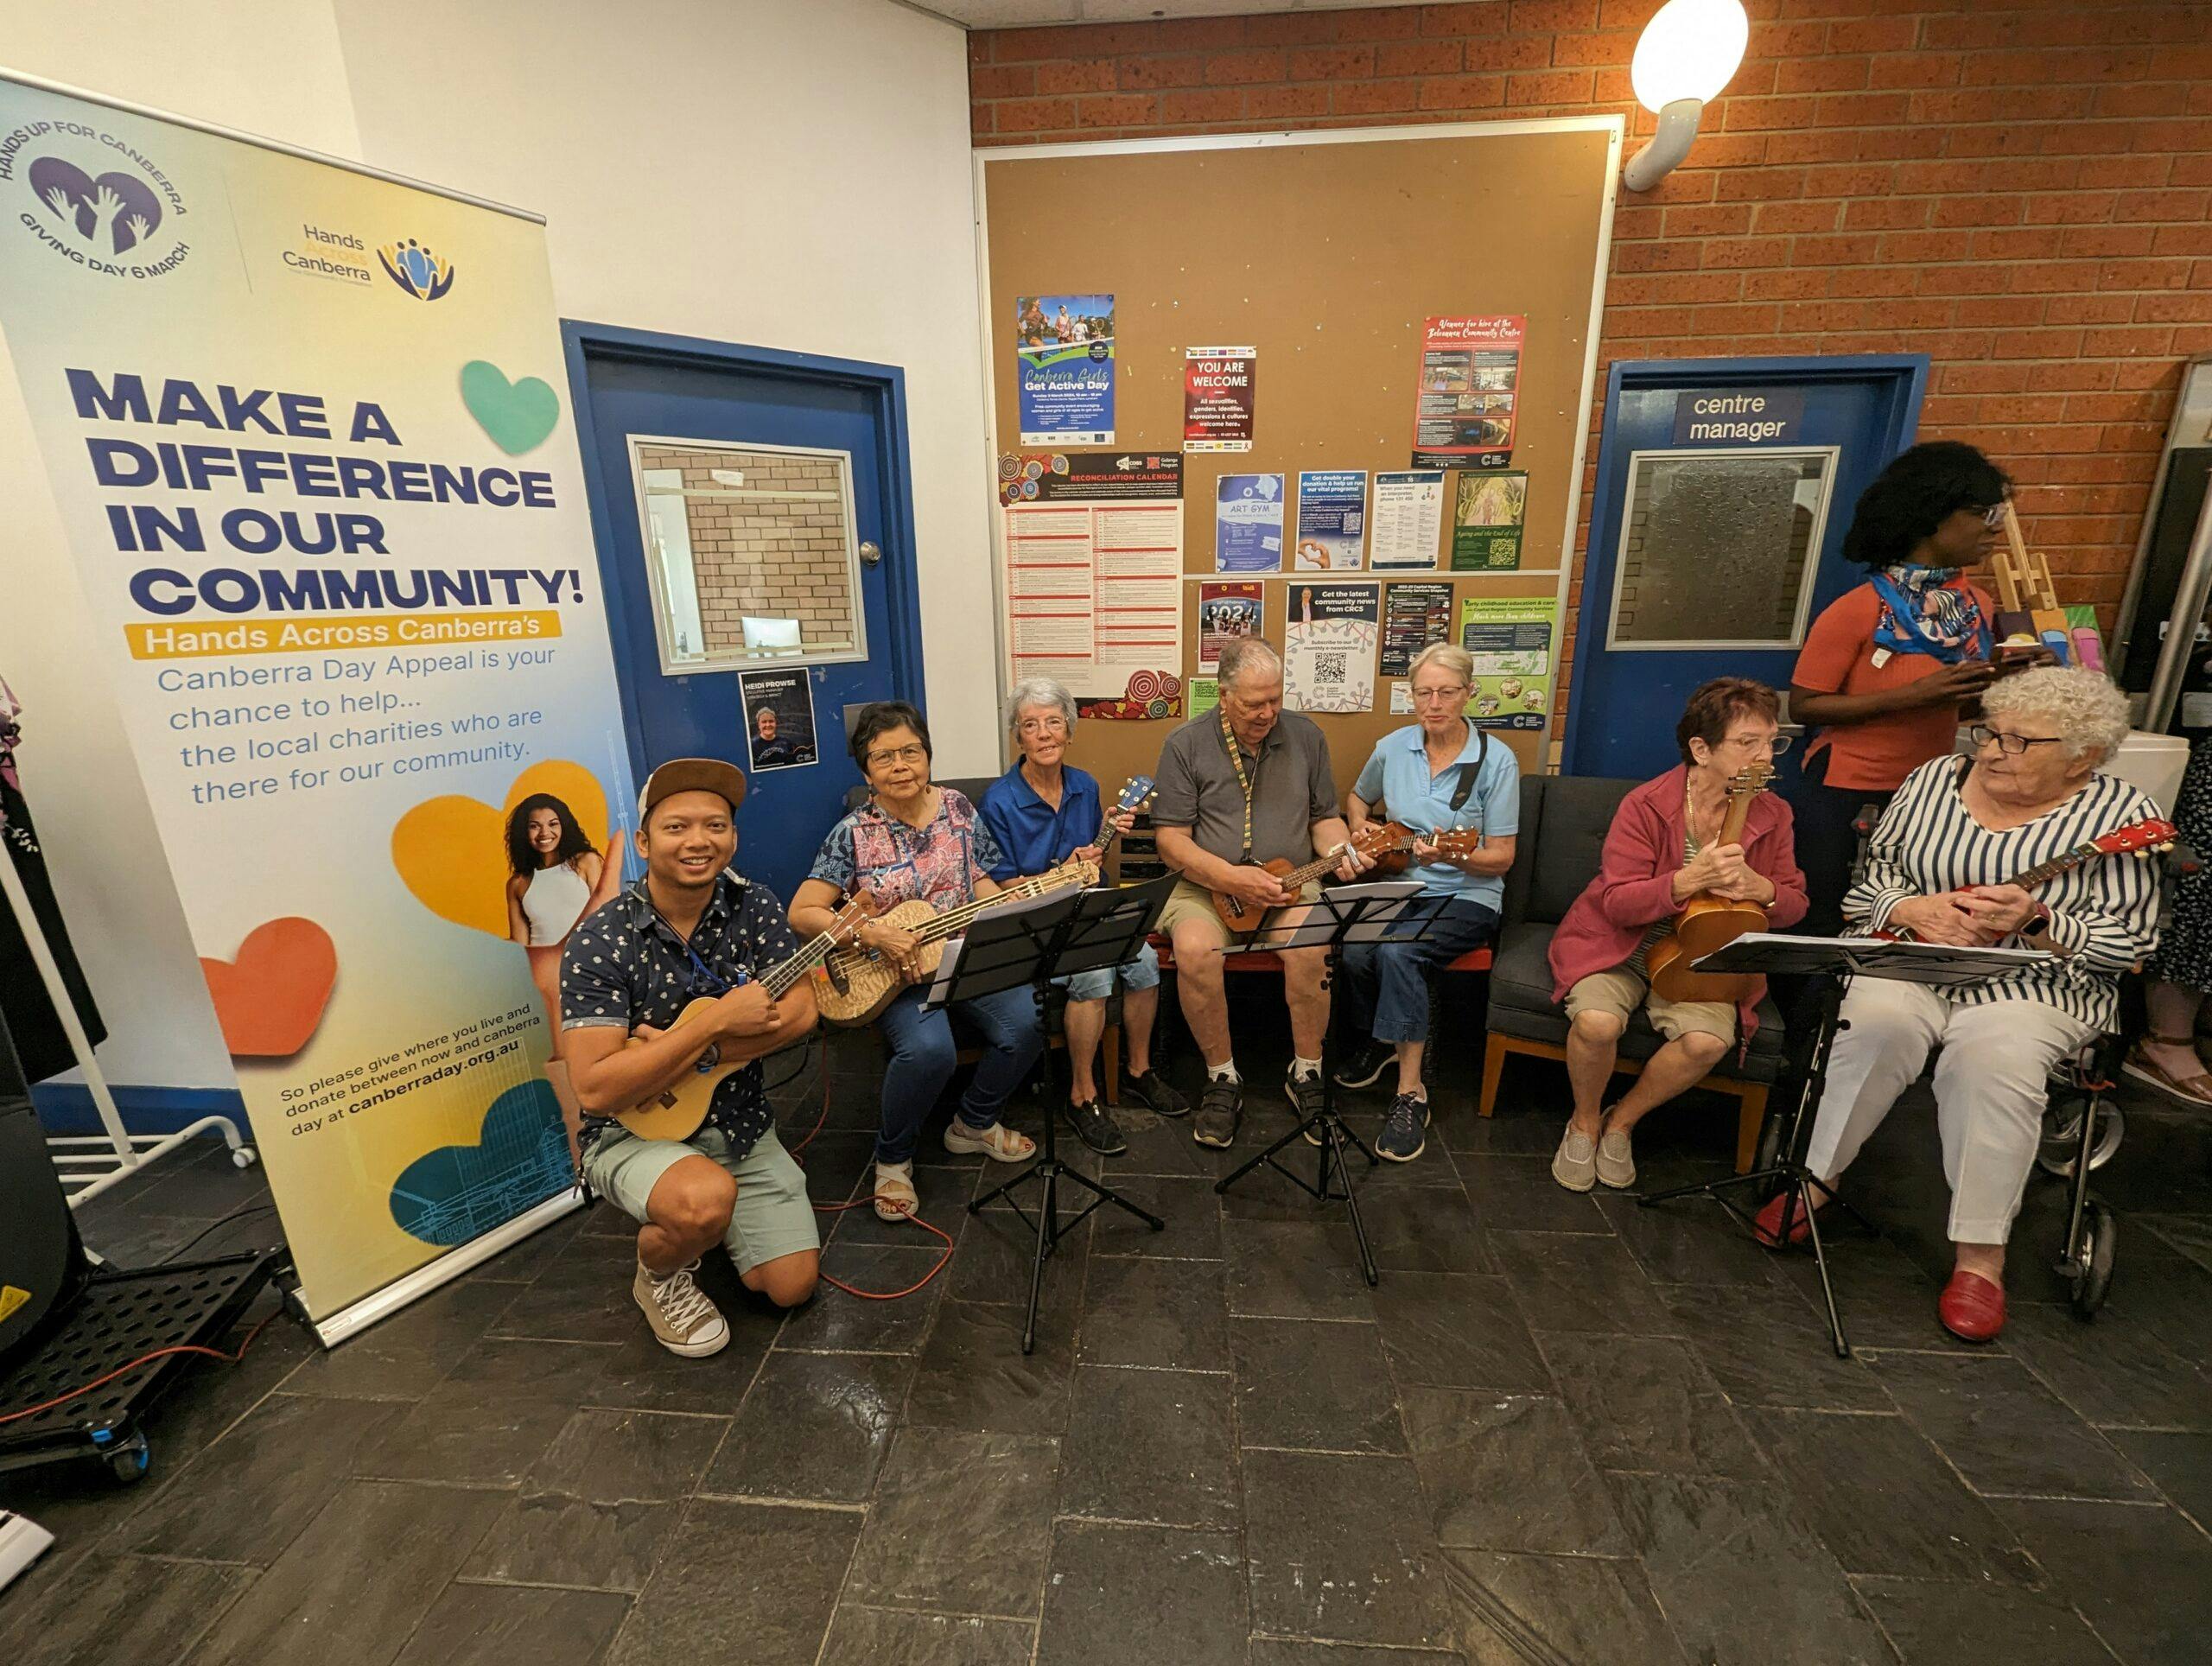 The Involve team takes a group photo with their ukuleles in hand.